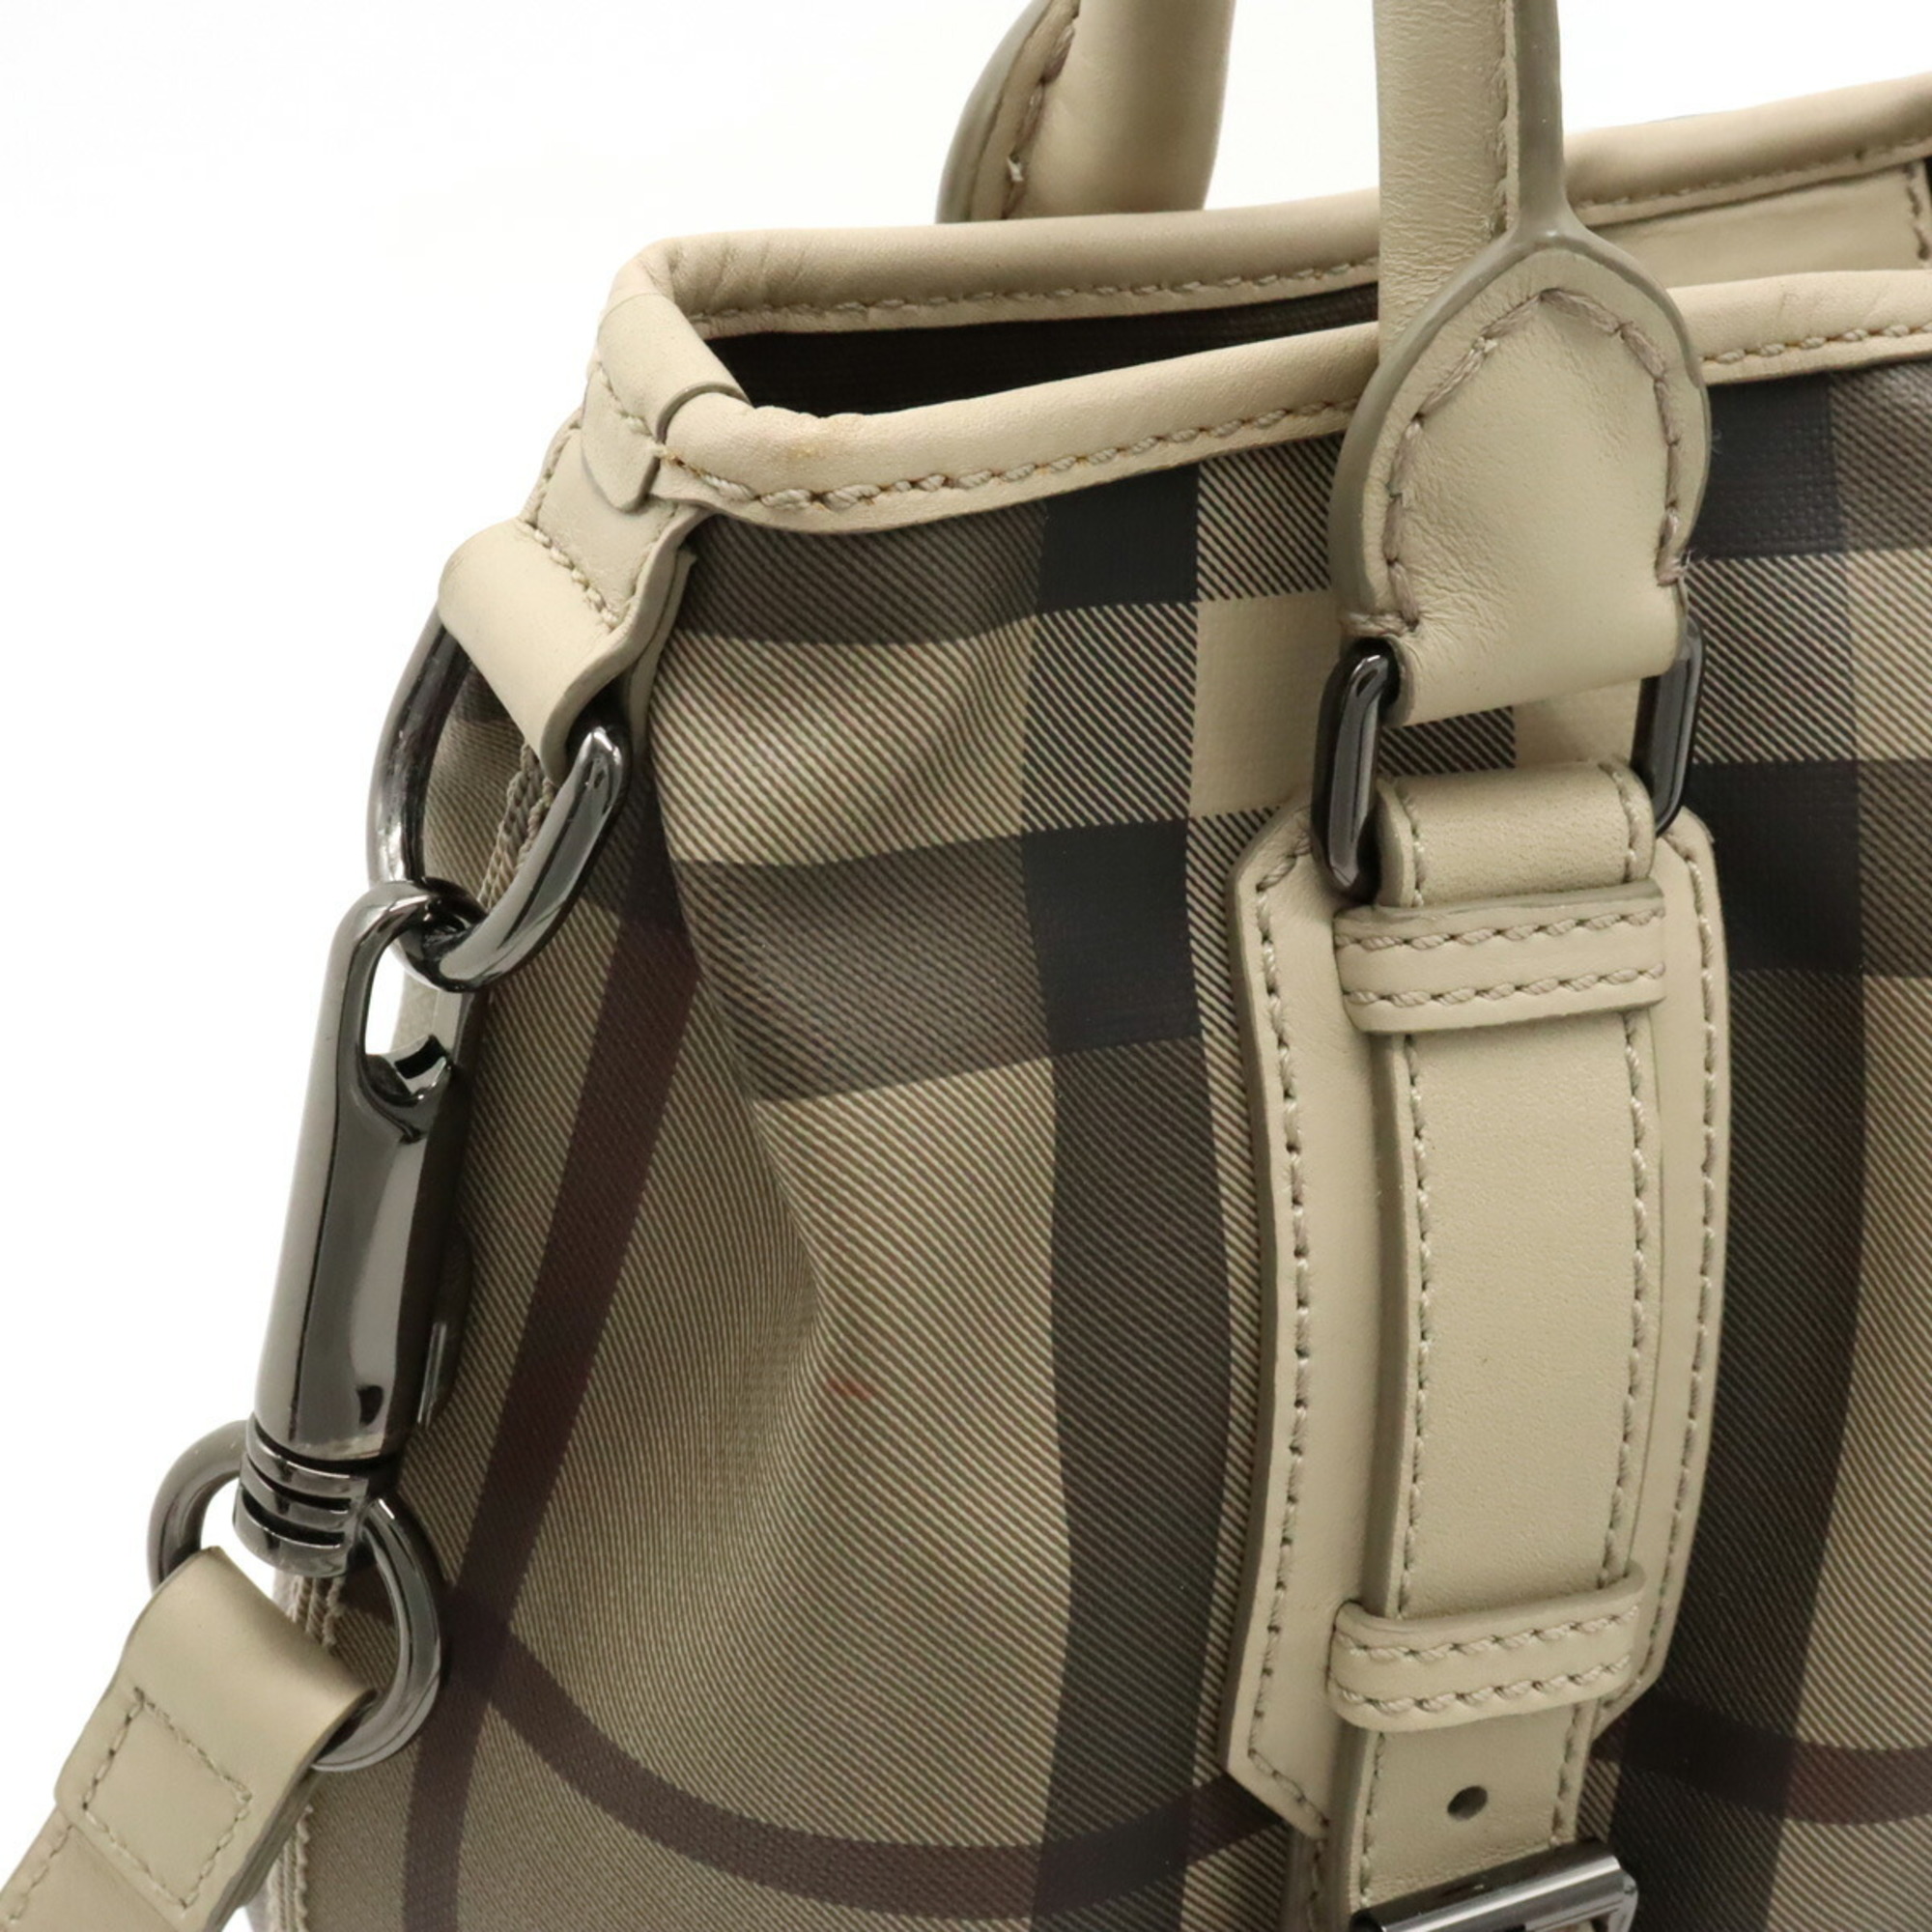 BURBERRY Smoked check shoulder bag PVC leather light beige grey multi